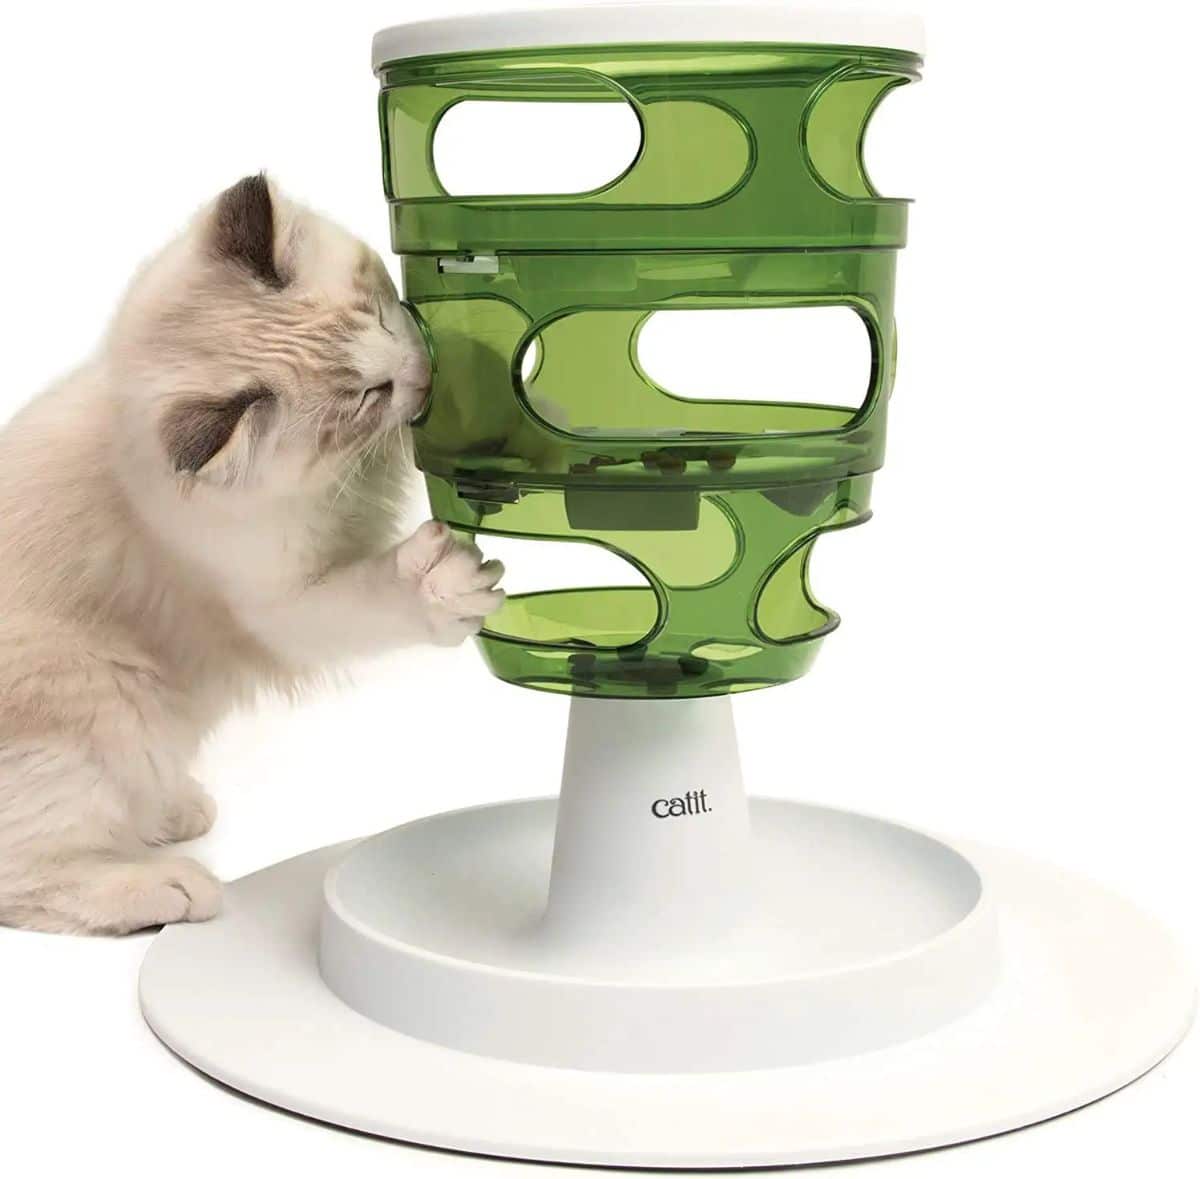 A cat nibbling on a plastic toy.